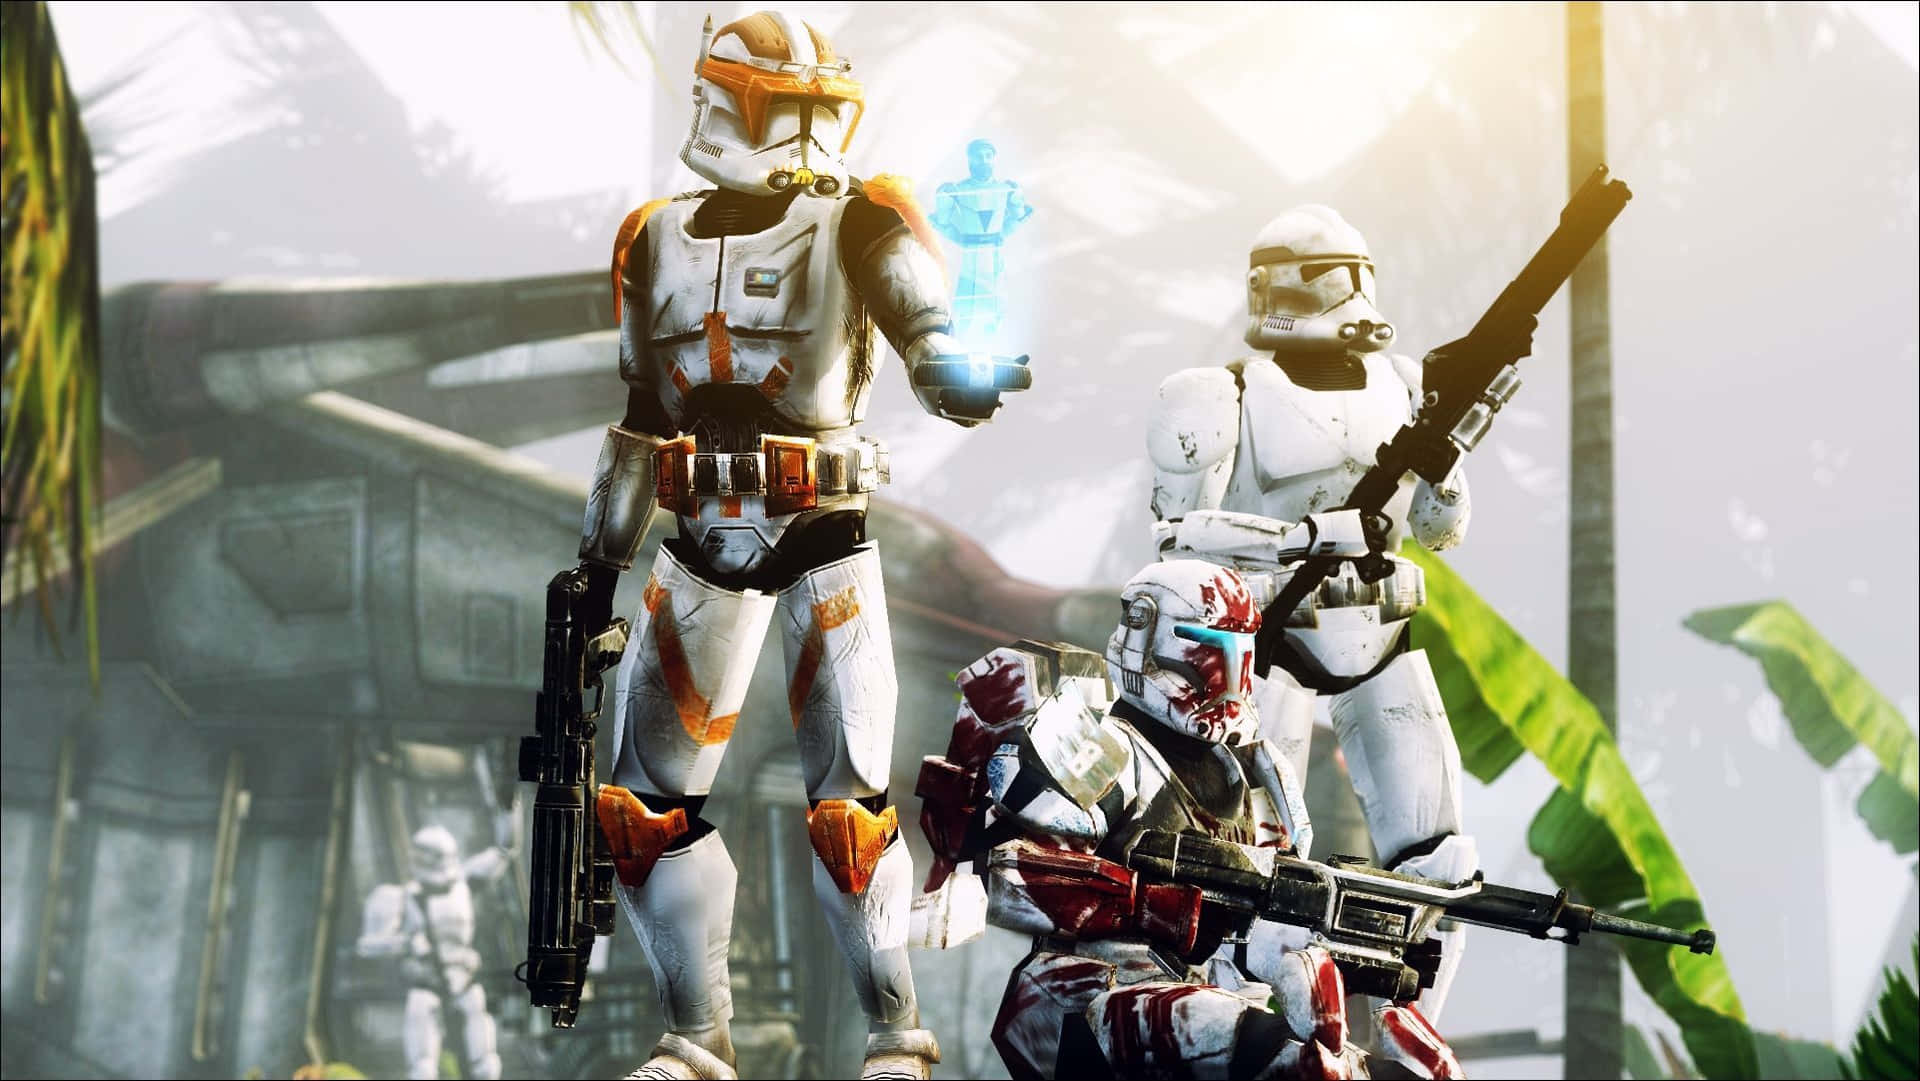 "The Clones ready their blasters to battle in the Clone Wars." Wallpaper